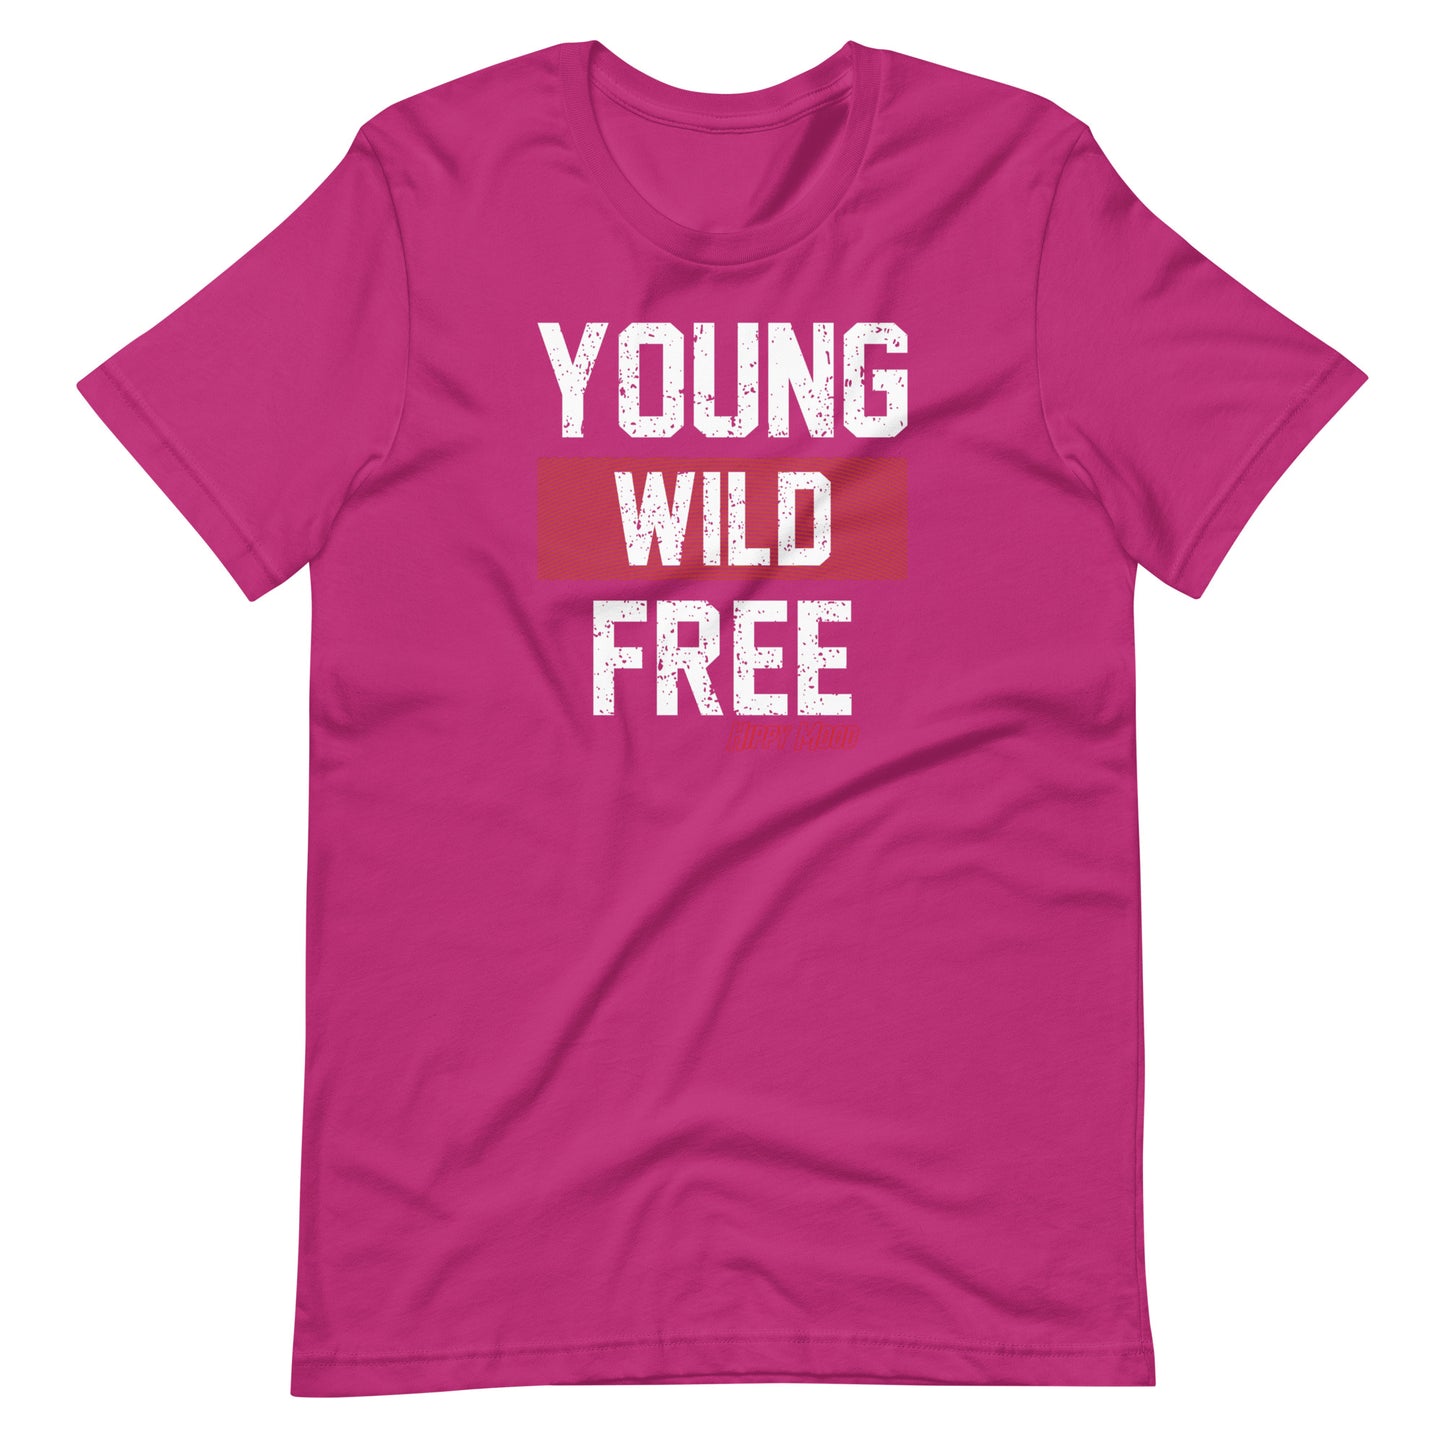 Young, Wild, Free | Unisex t-shirt